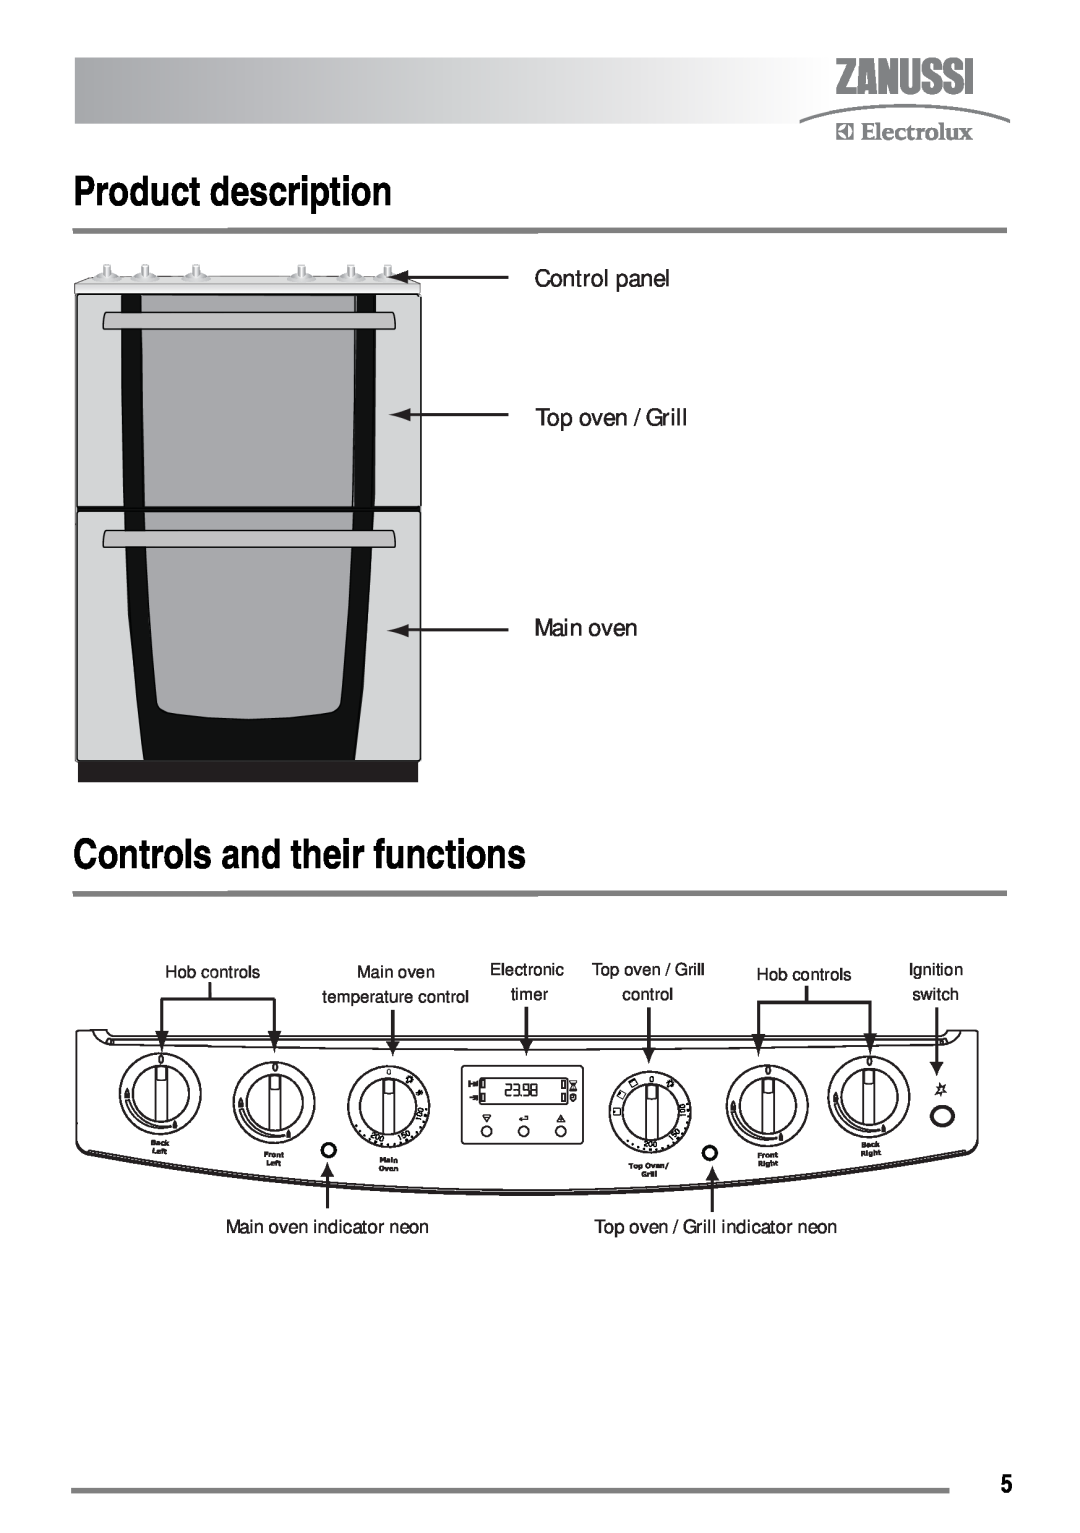 Zanussi ZKM6040 Product description, Controls and their functions, Control panel Top oven / Grill Main oven, Electronic 